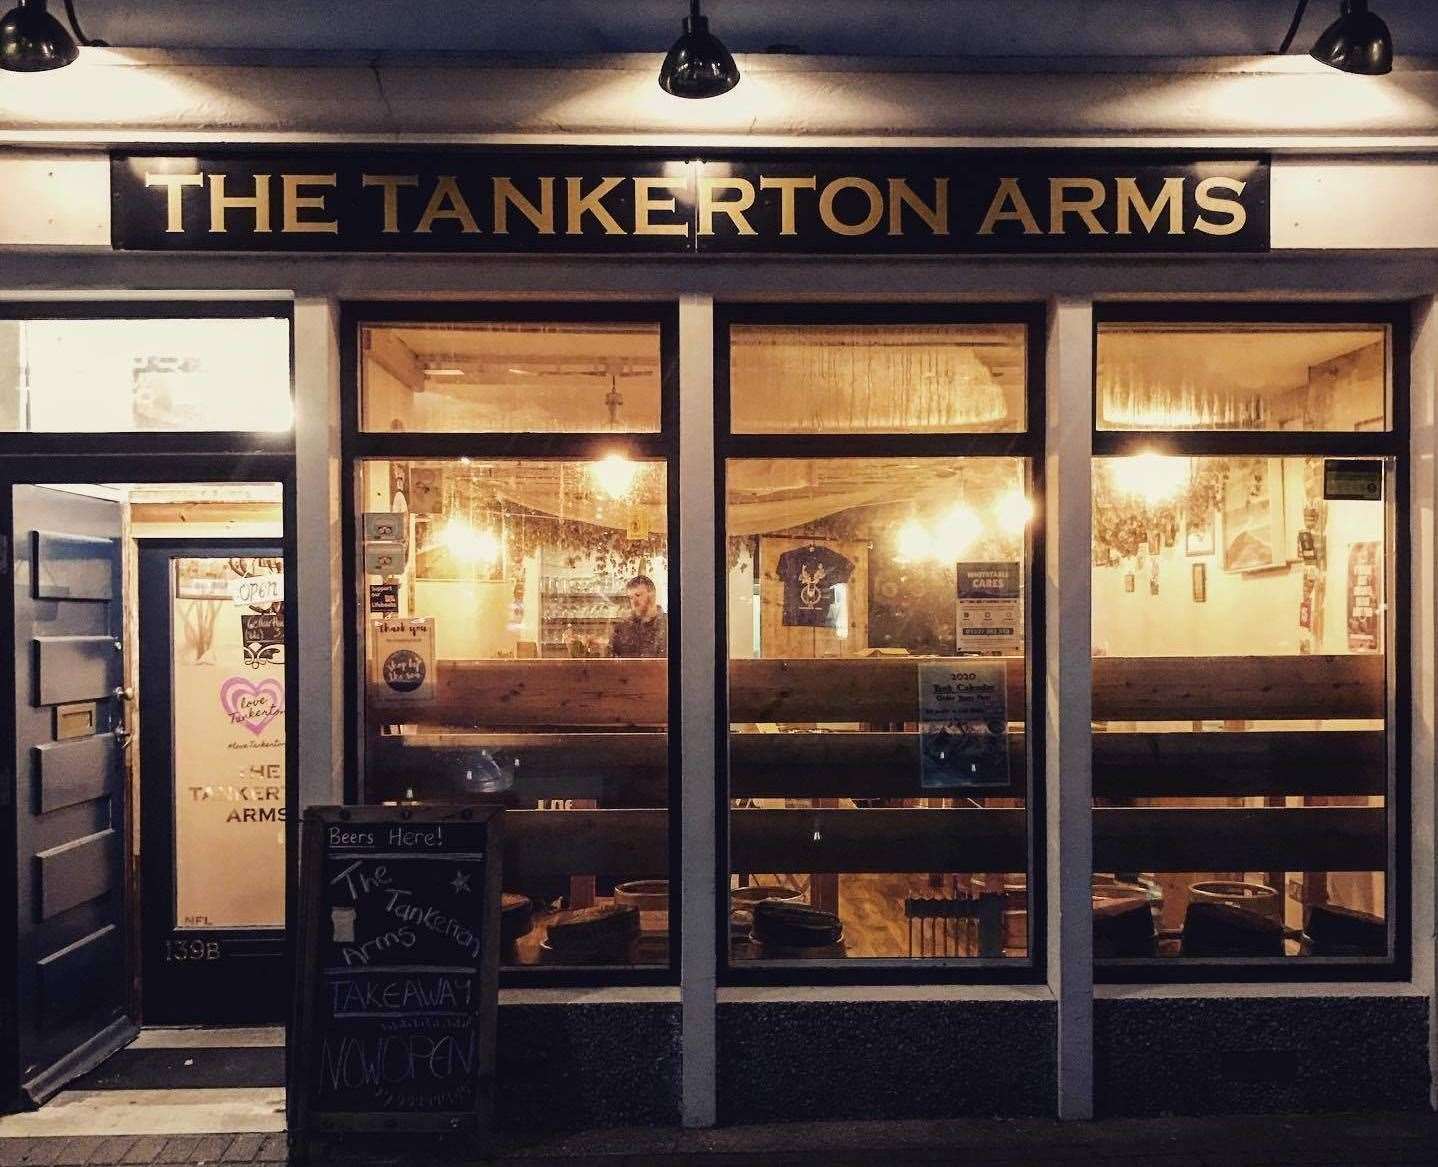 The Tankerton Arms is the top-rated micropub in Kent on TripAdvisor